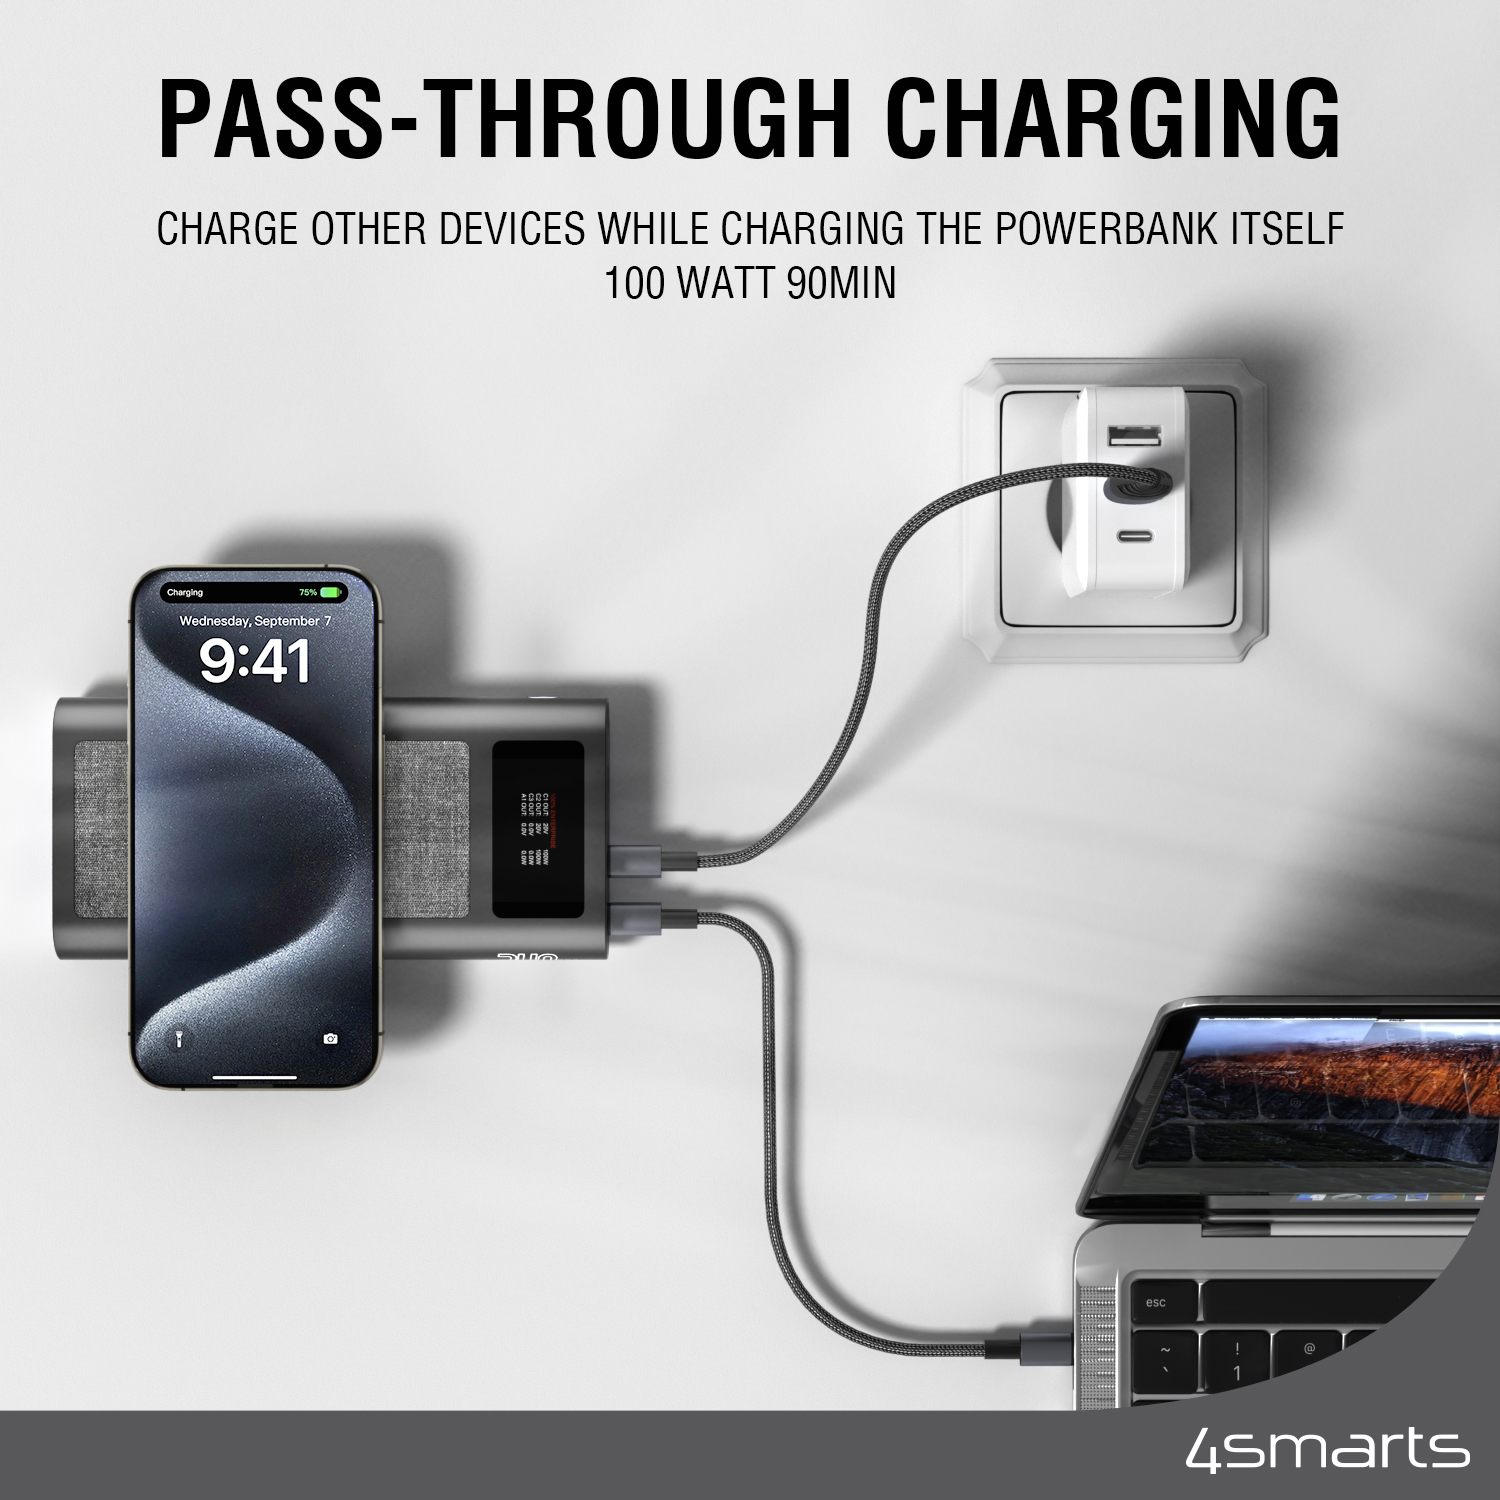 The 4smarts Enterprise Ultra Powerbank with 26800mAh is through-chargeable, which means you can use it to charge other devices while the powerbank is charging.